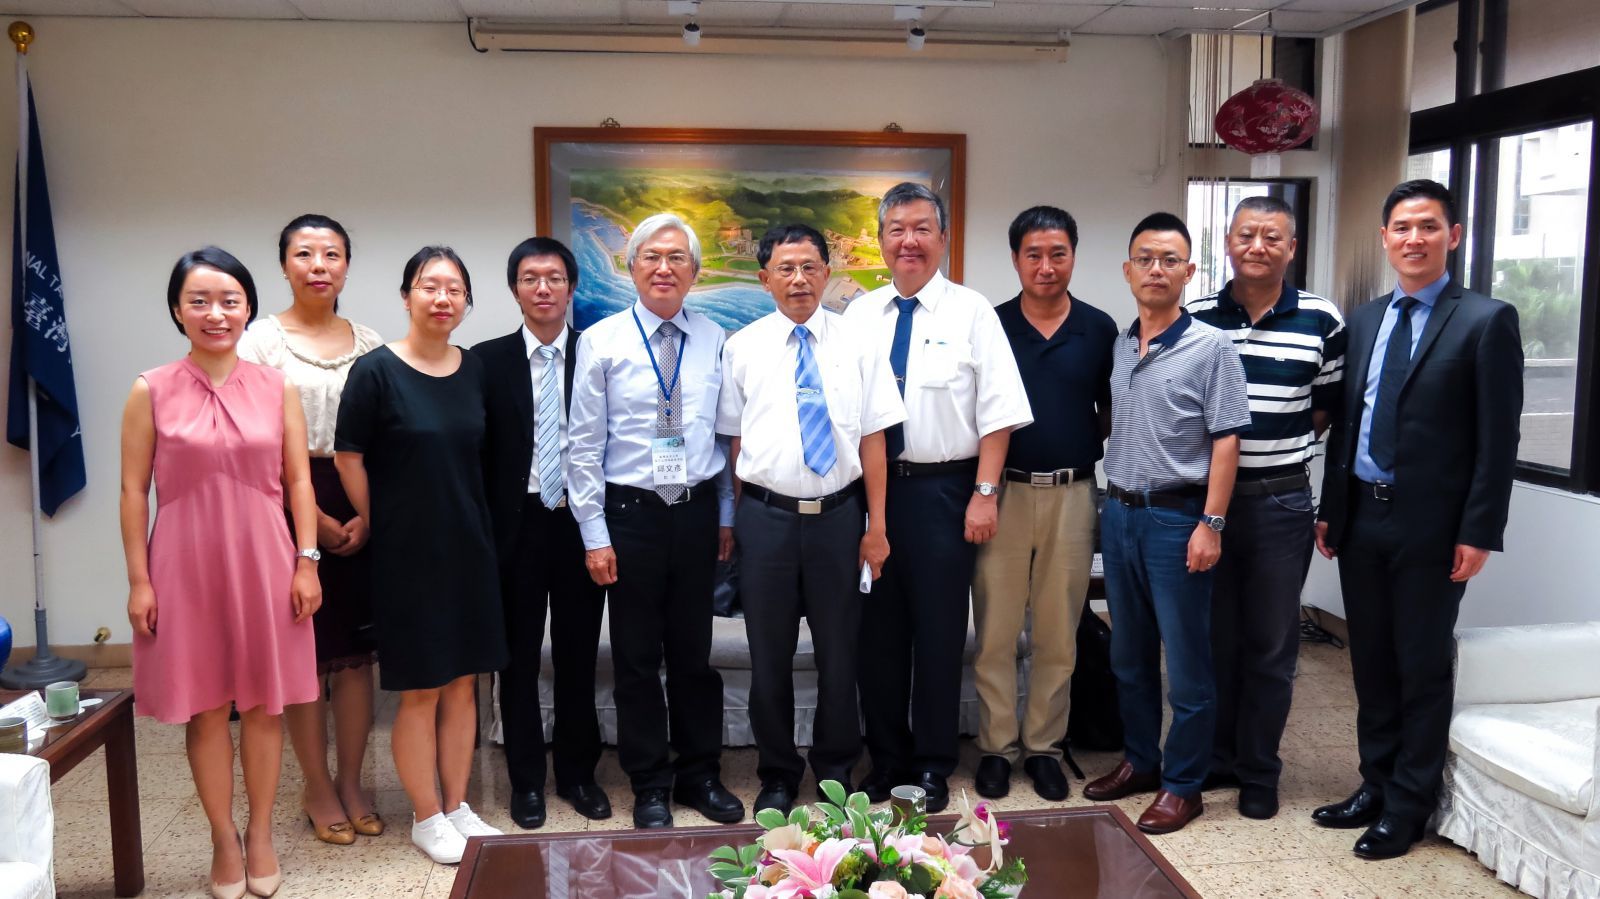 Overseas experts and scholars met with the President of the Court, Qiu Wenyan, President Zhang Qingfeng